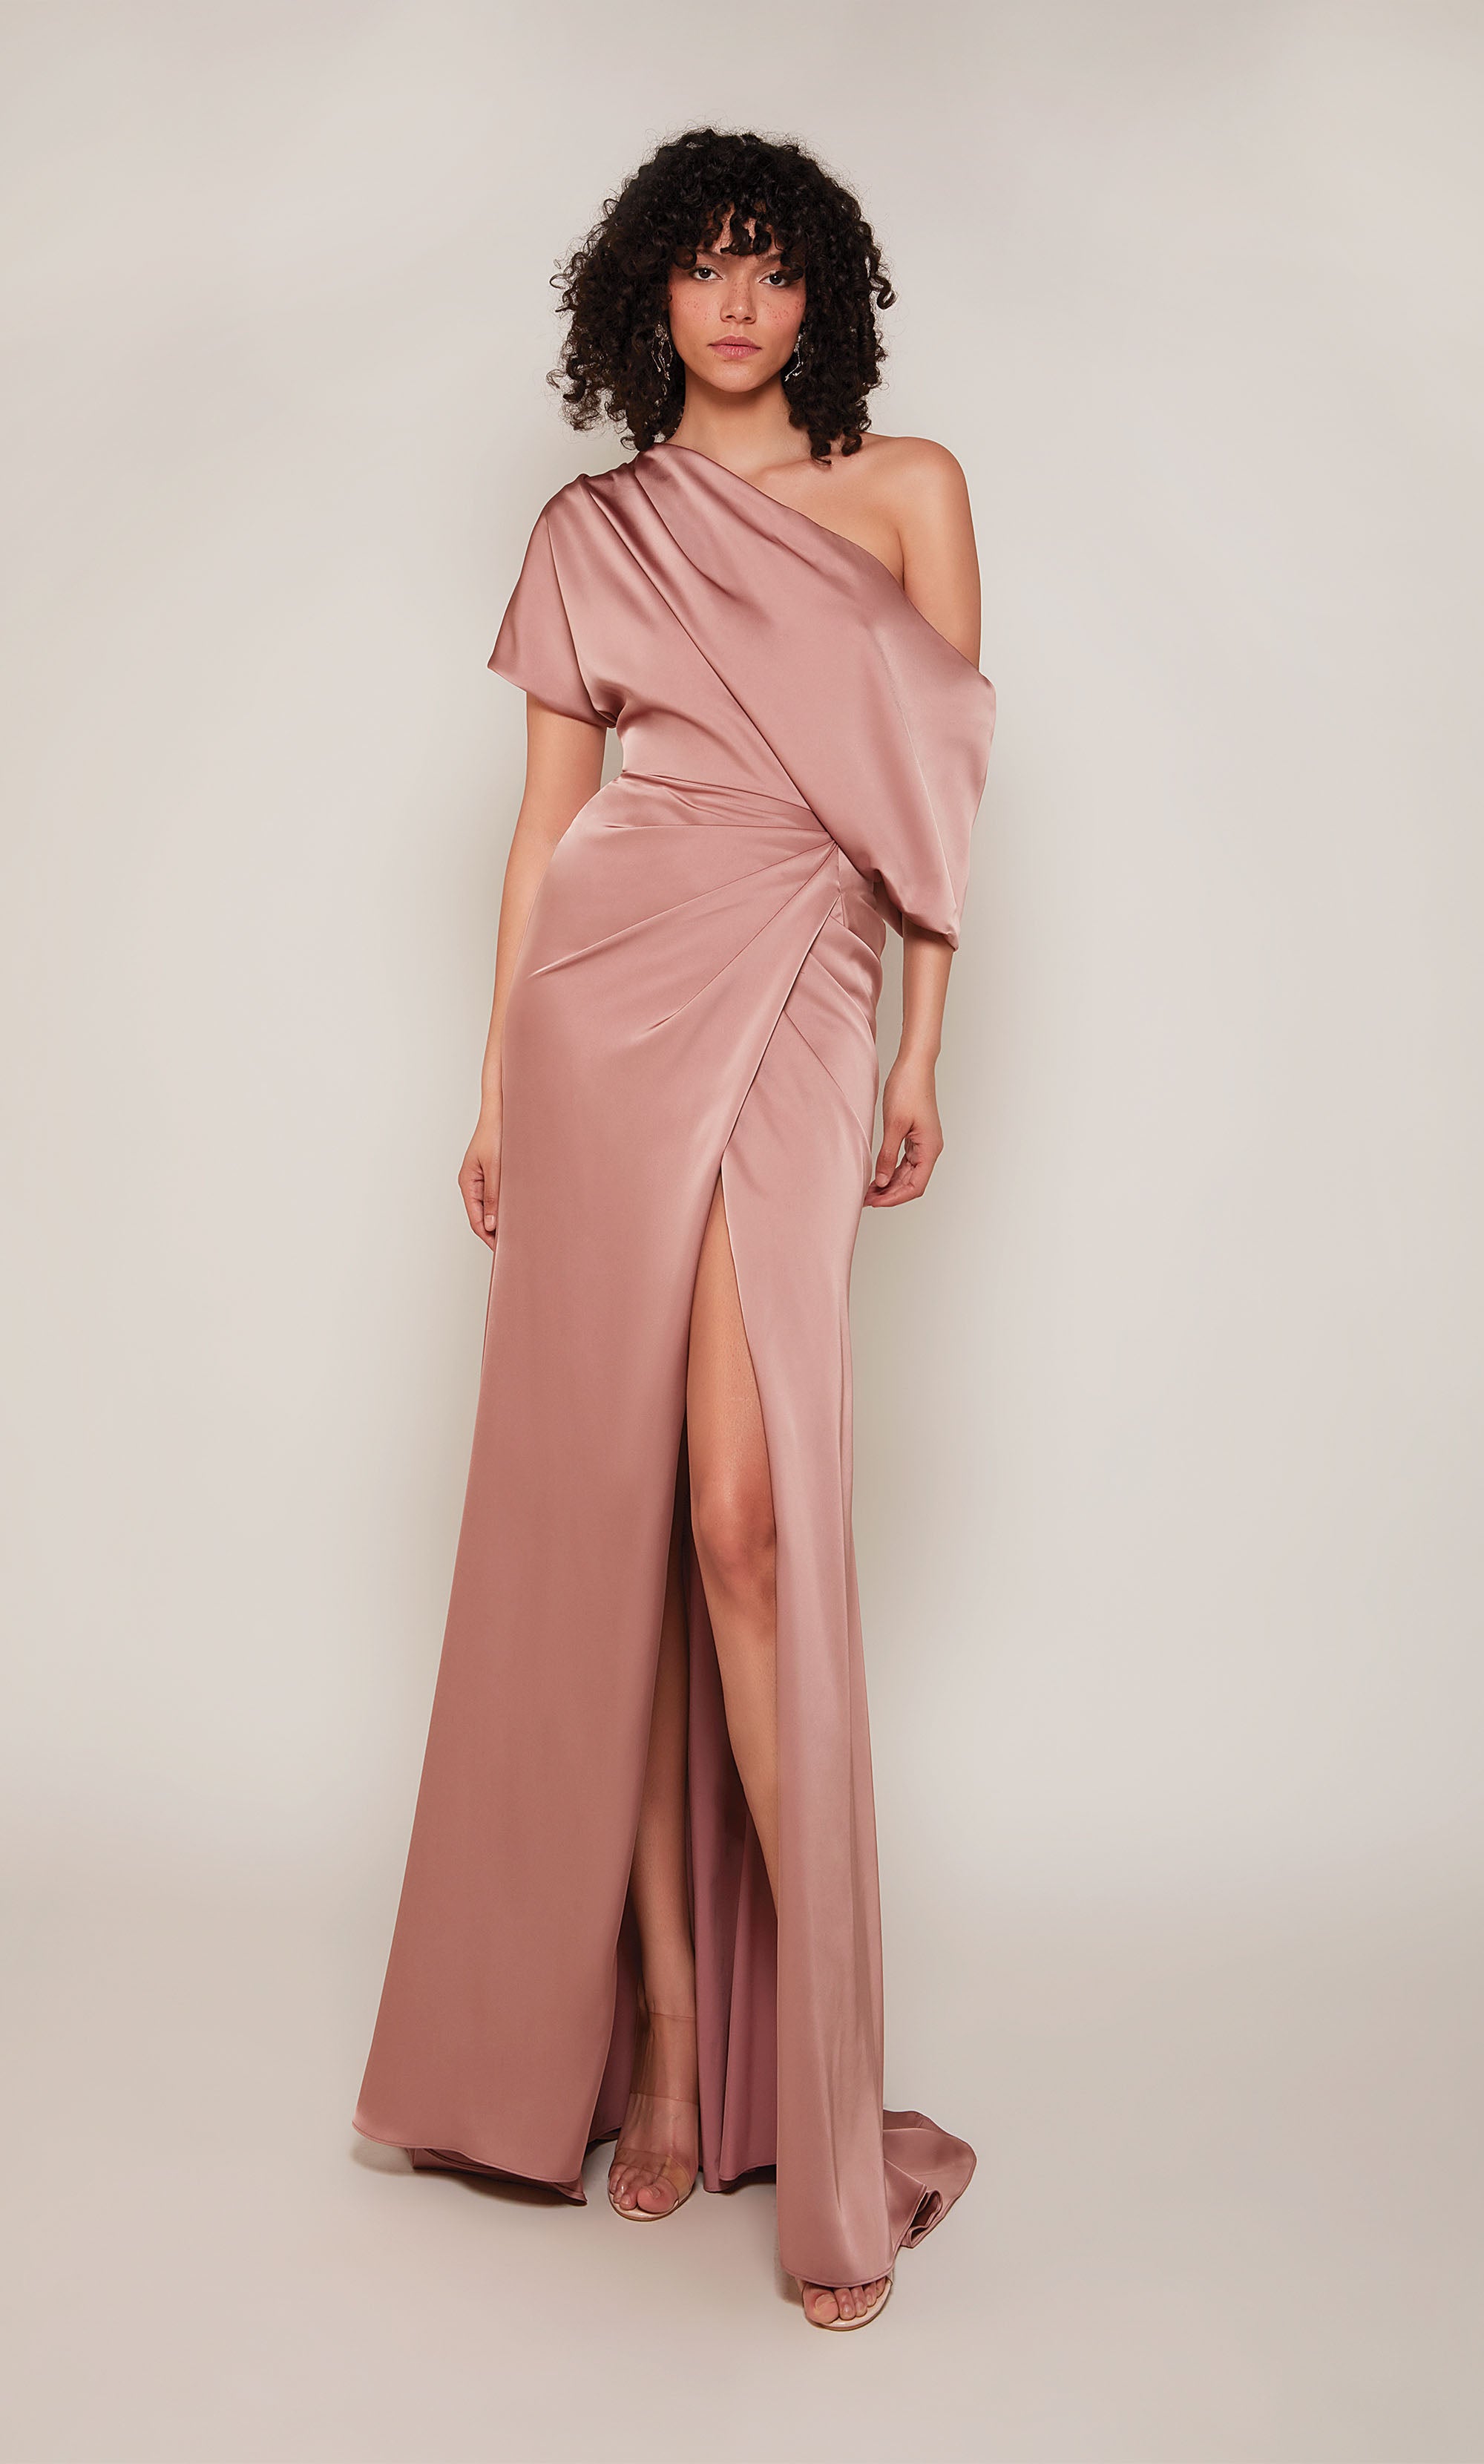 One shoulder satin wedding guest dress with a draped top, a fitted skirt, and a front slit in vintage rose.